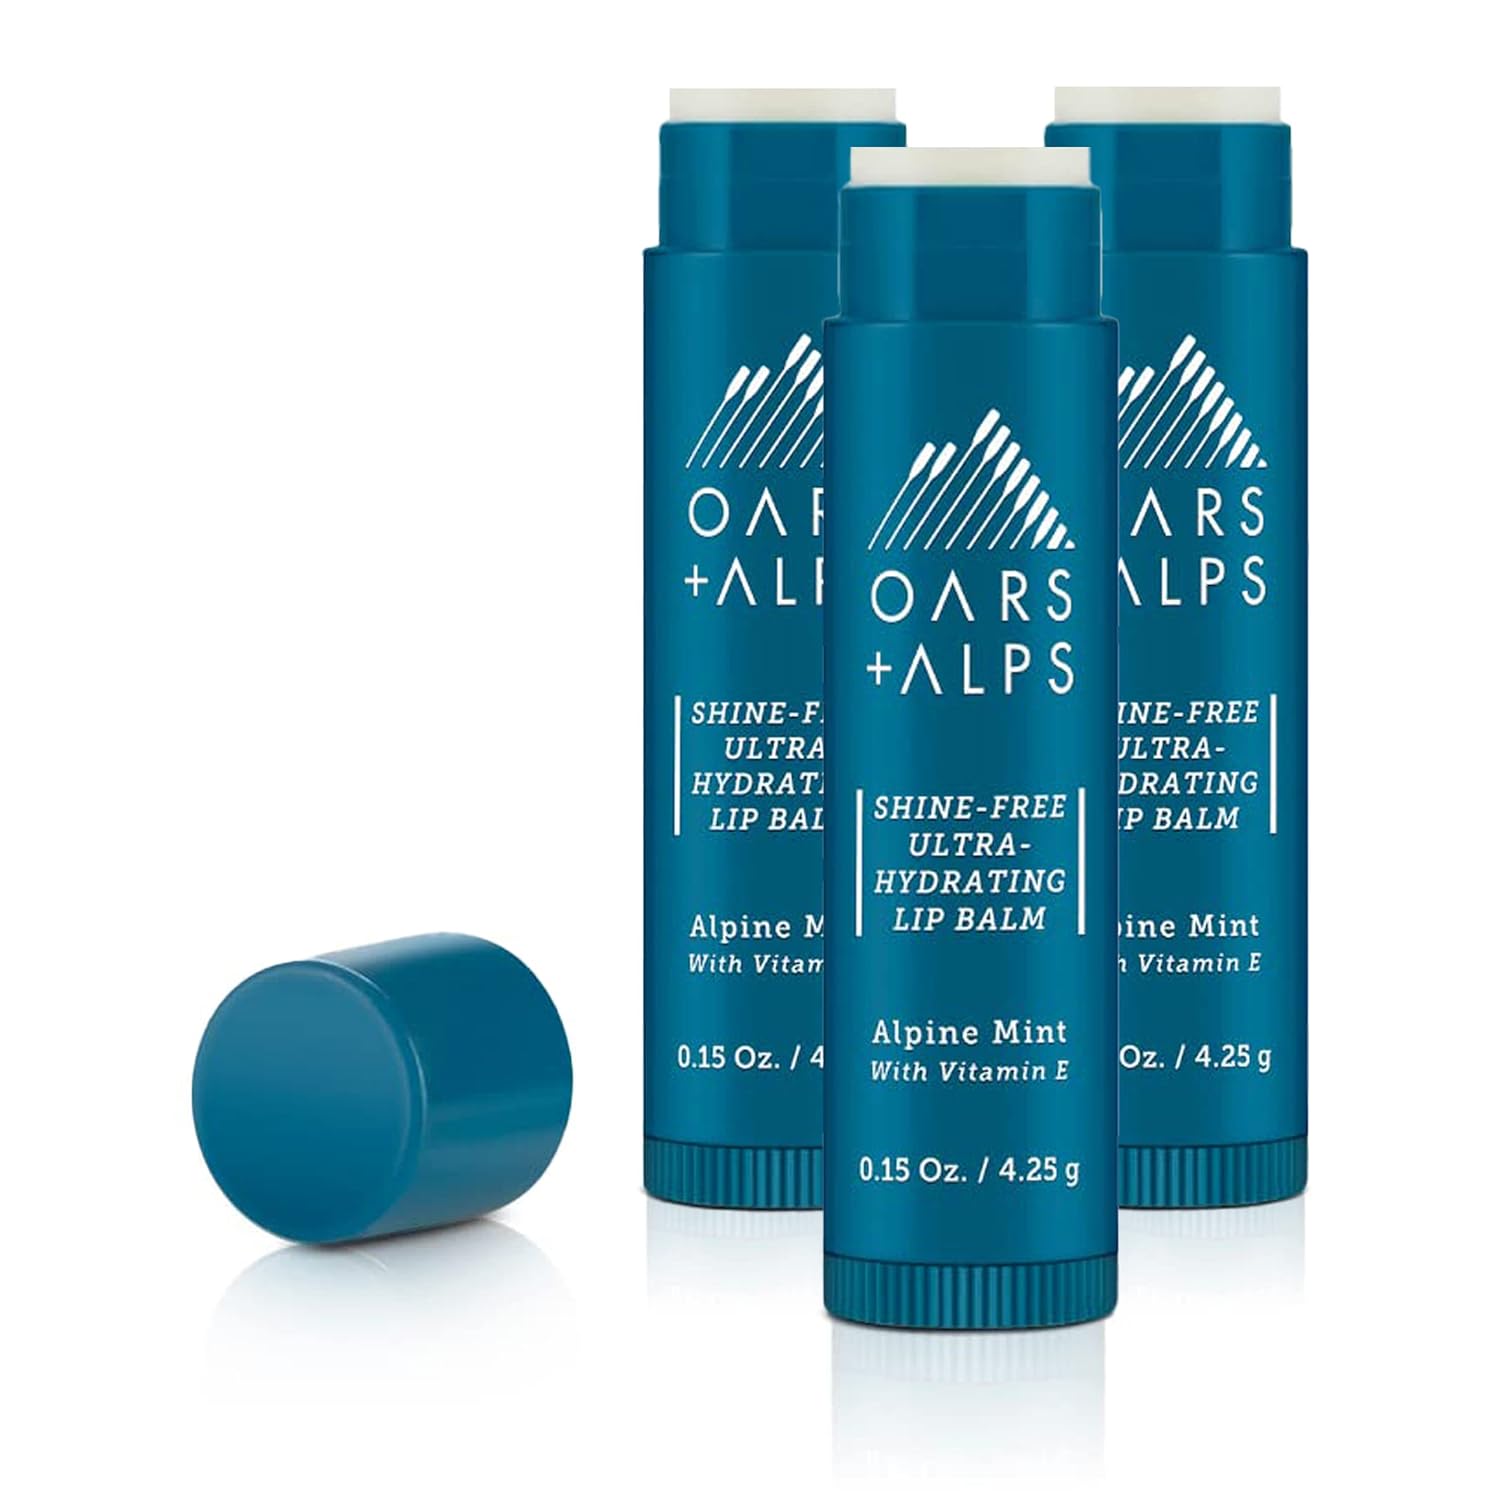 Oars + Alps Shine Free Lip Balm, Ultra Hydrating Lip Care Infused with Vitamin E, Alpine Mint Scent, 0.45 Oz Each, 3 Pack